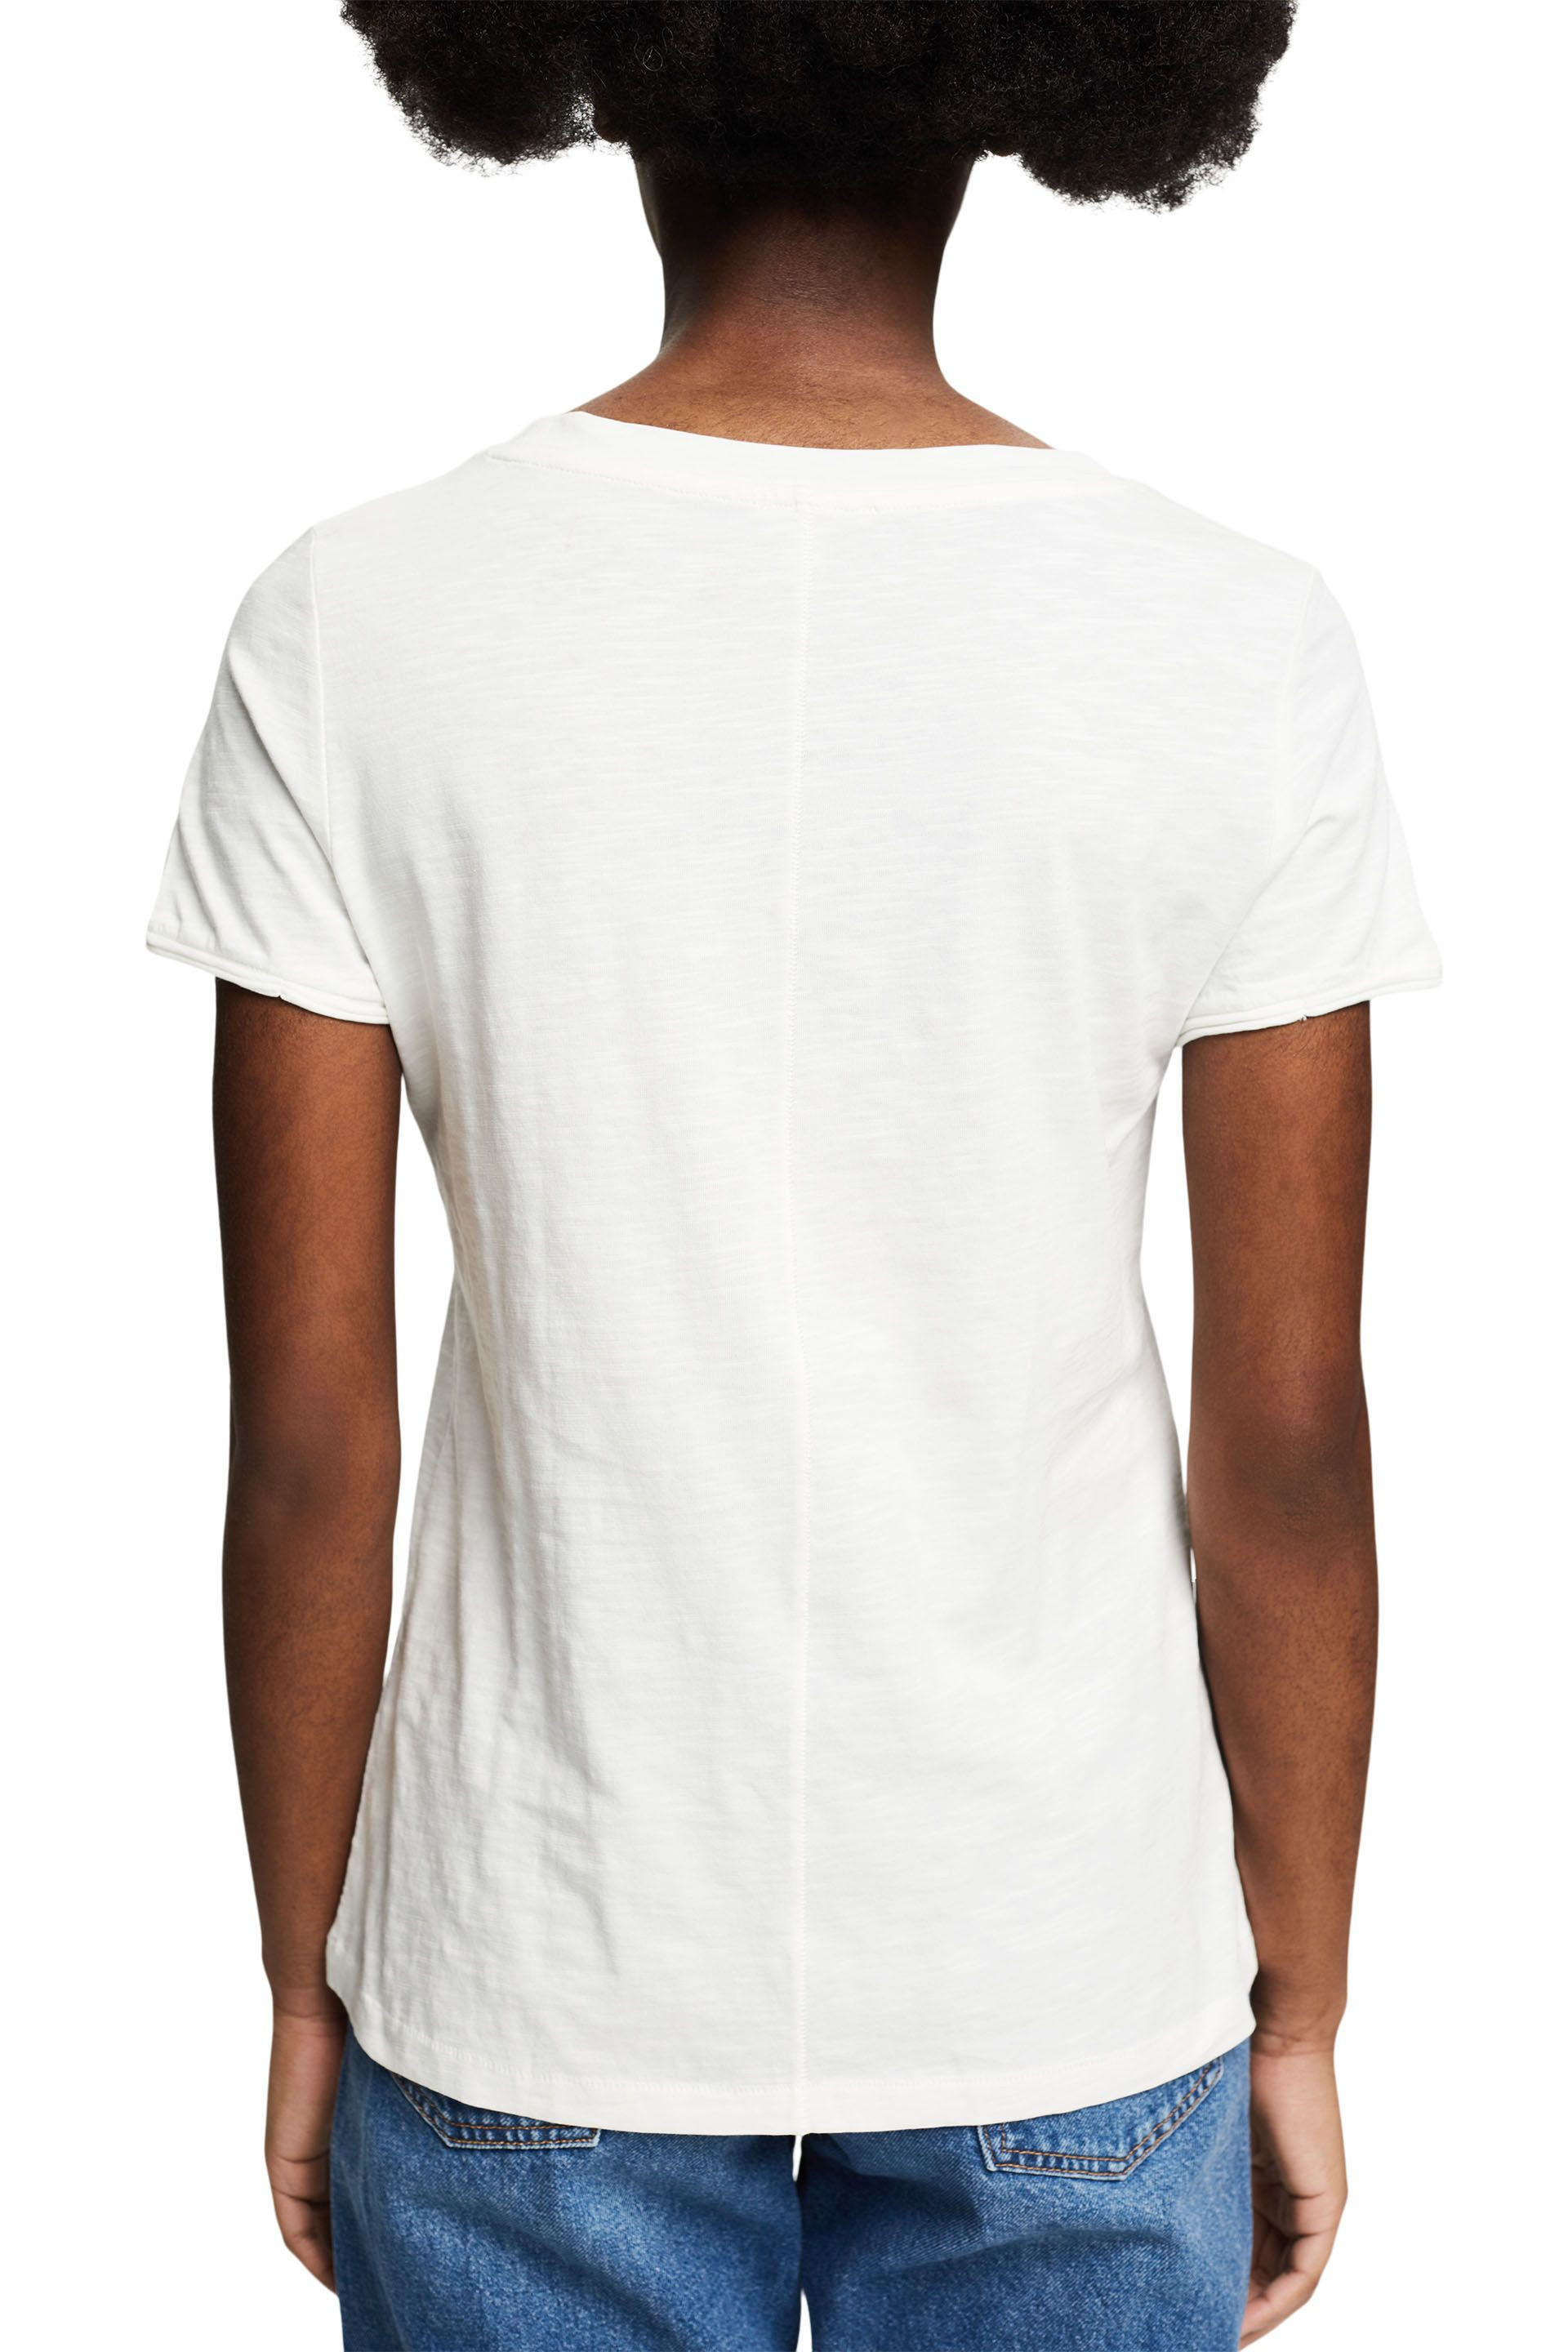 T-shirt with print, White, large image number 2